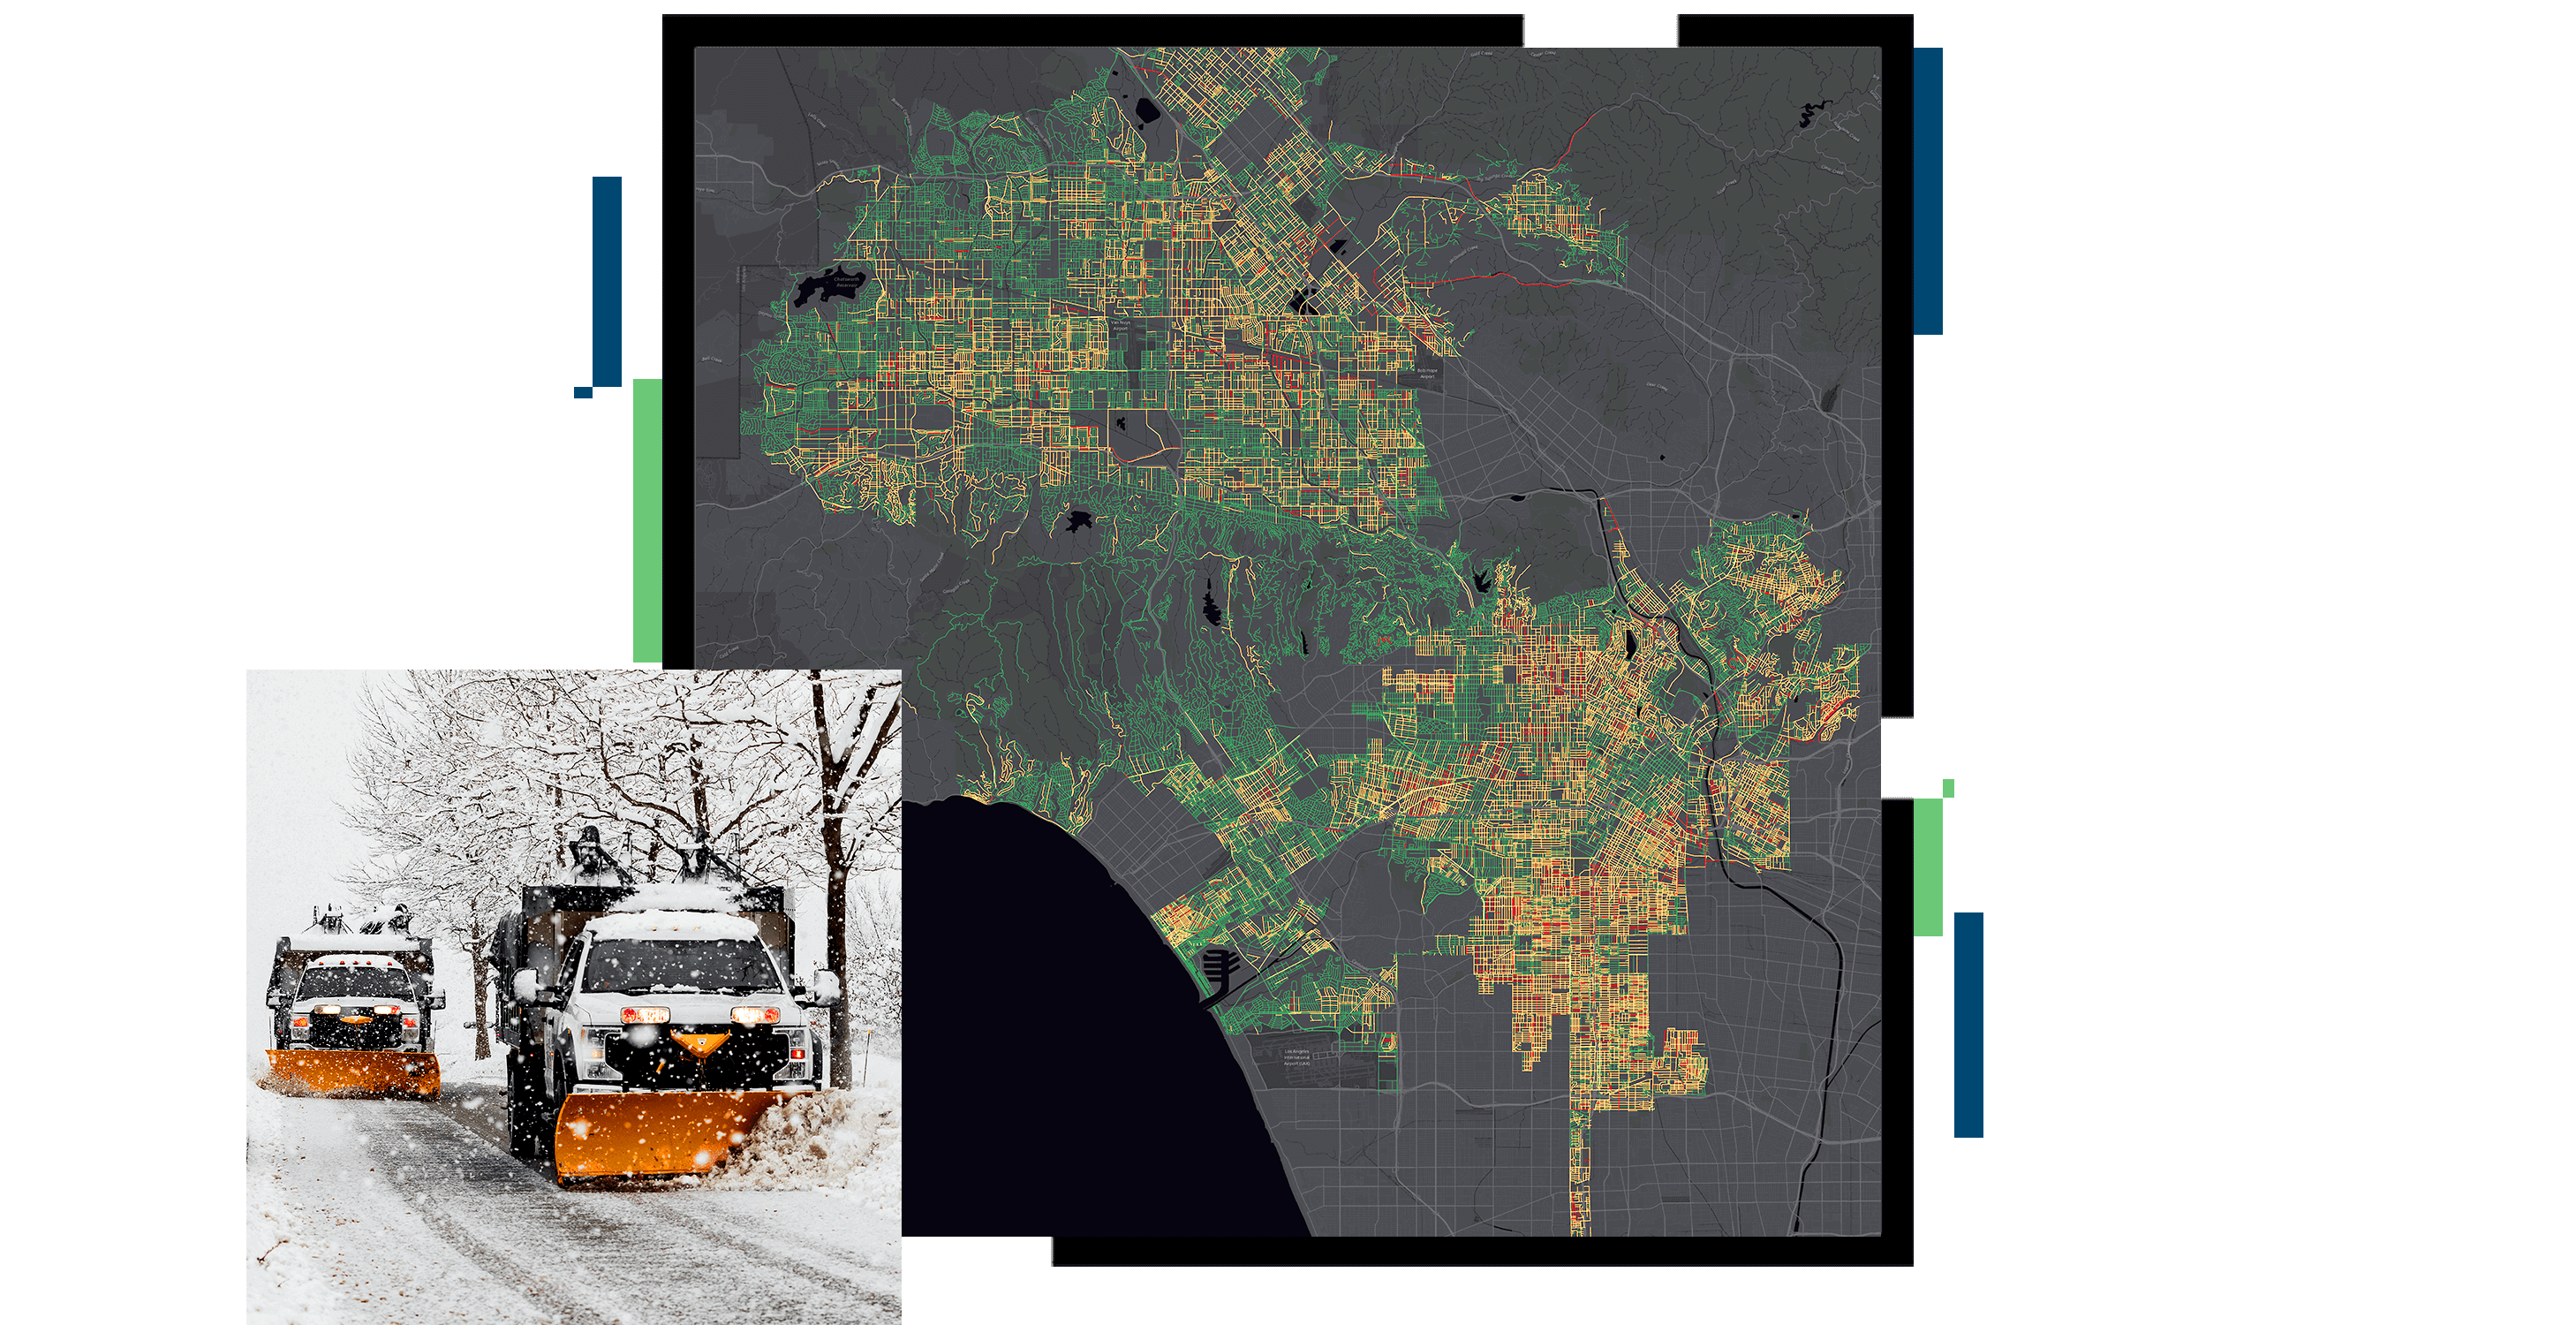 Two snowplow trucks scraping a snowy road, A grayscale map overlayed with green, yellow, and red areas